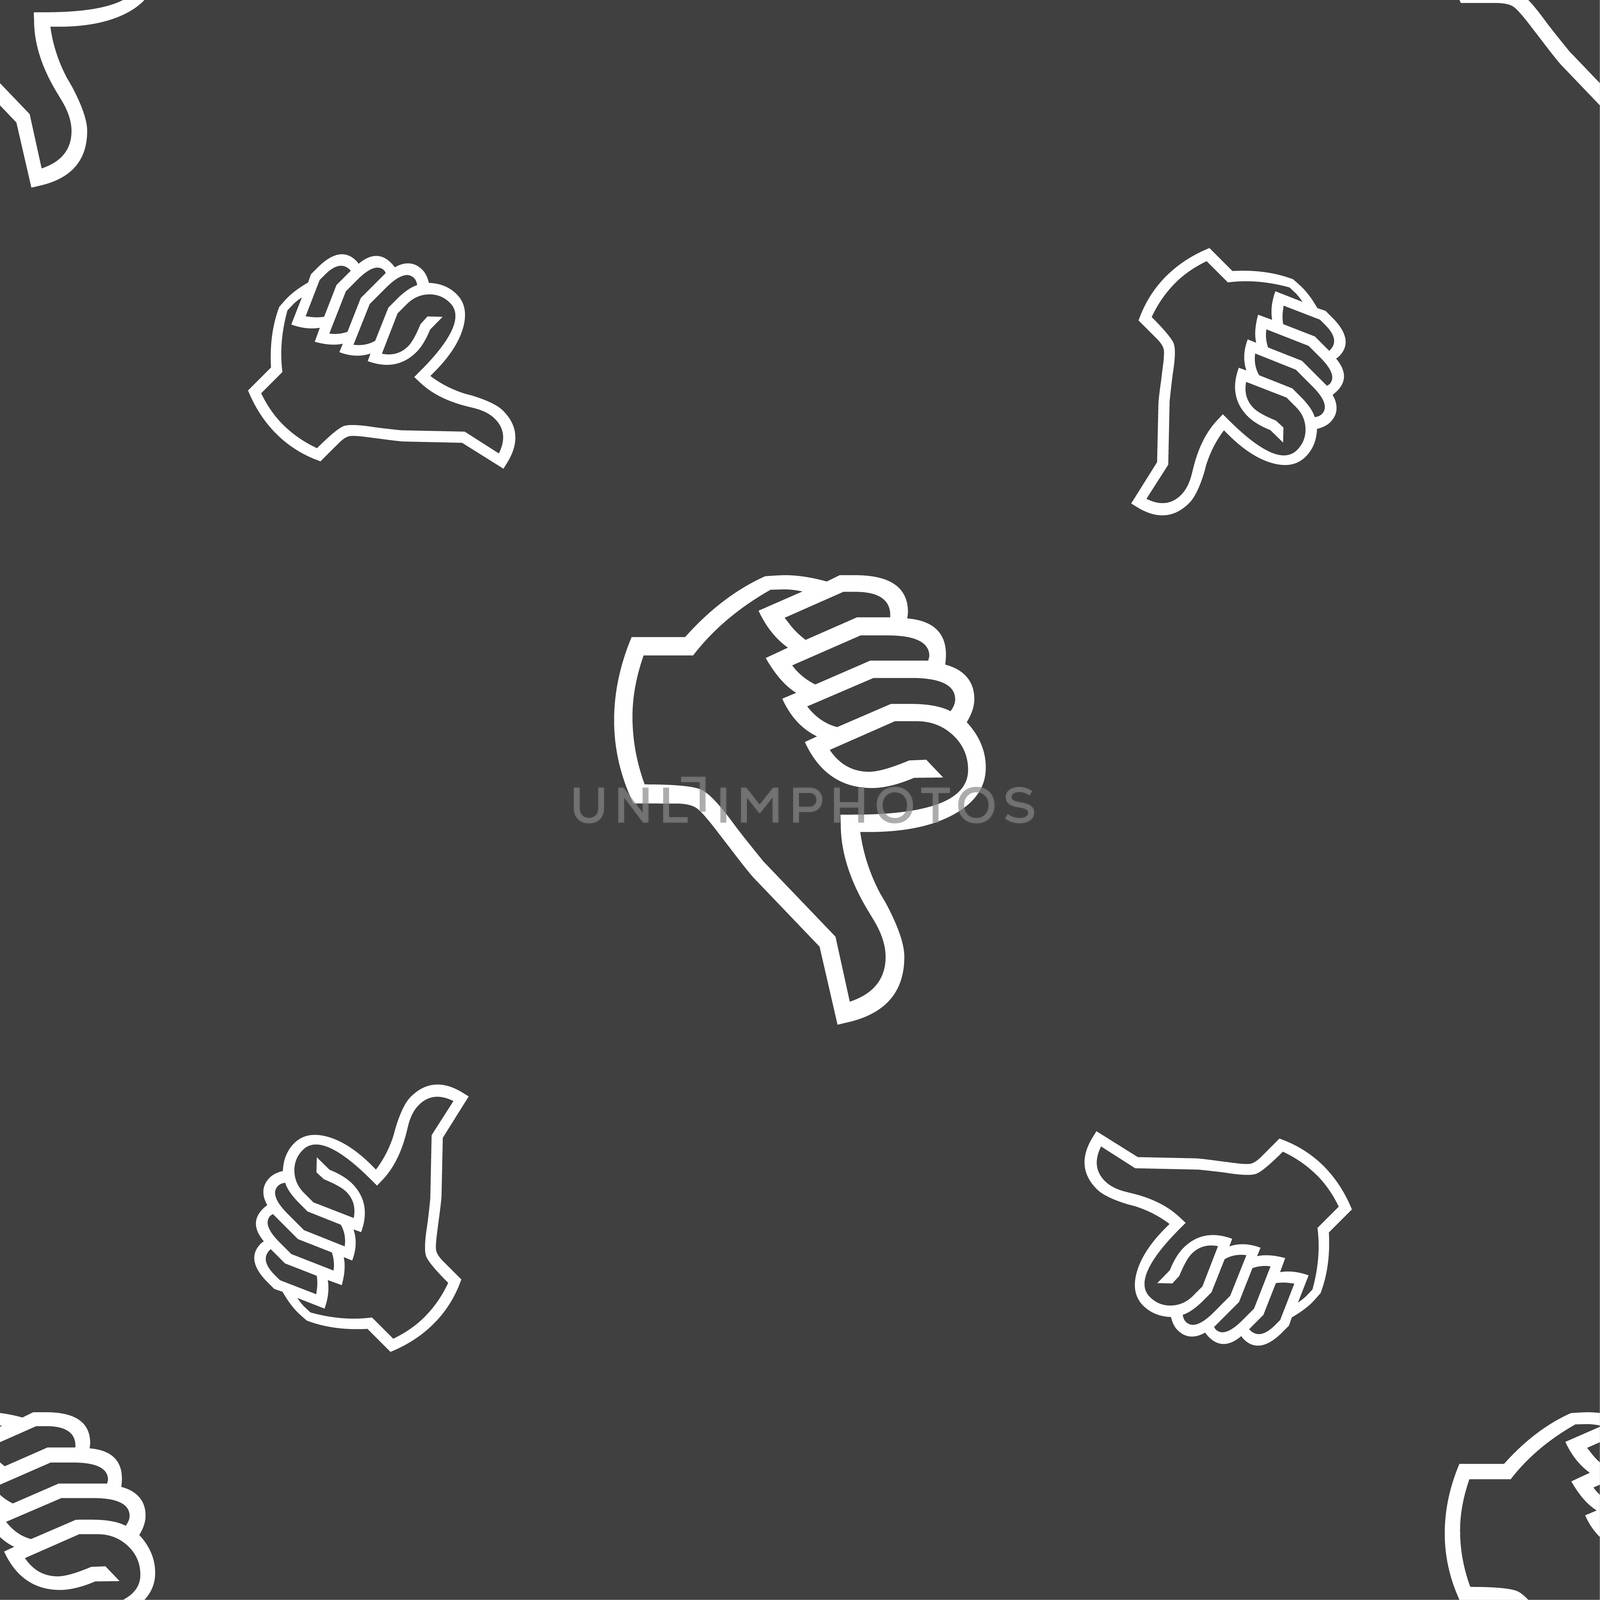 Dislike sign icon. Thumb down sign. Hand finger down symbol. Seamless pattern on a gray background. illustration